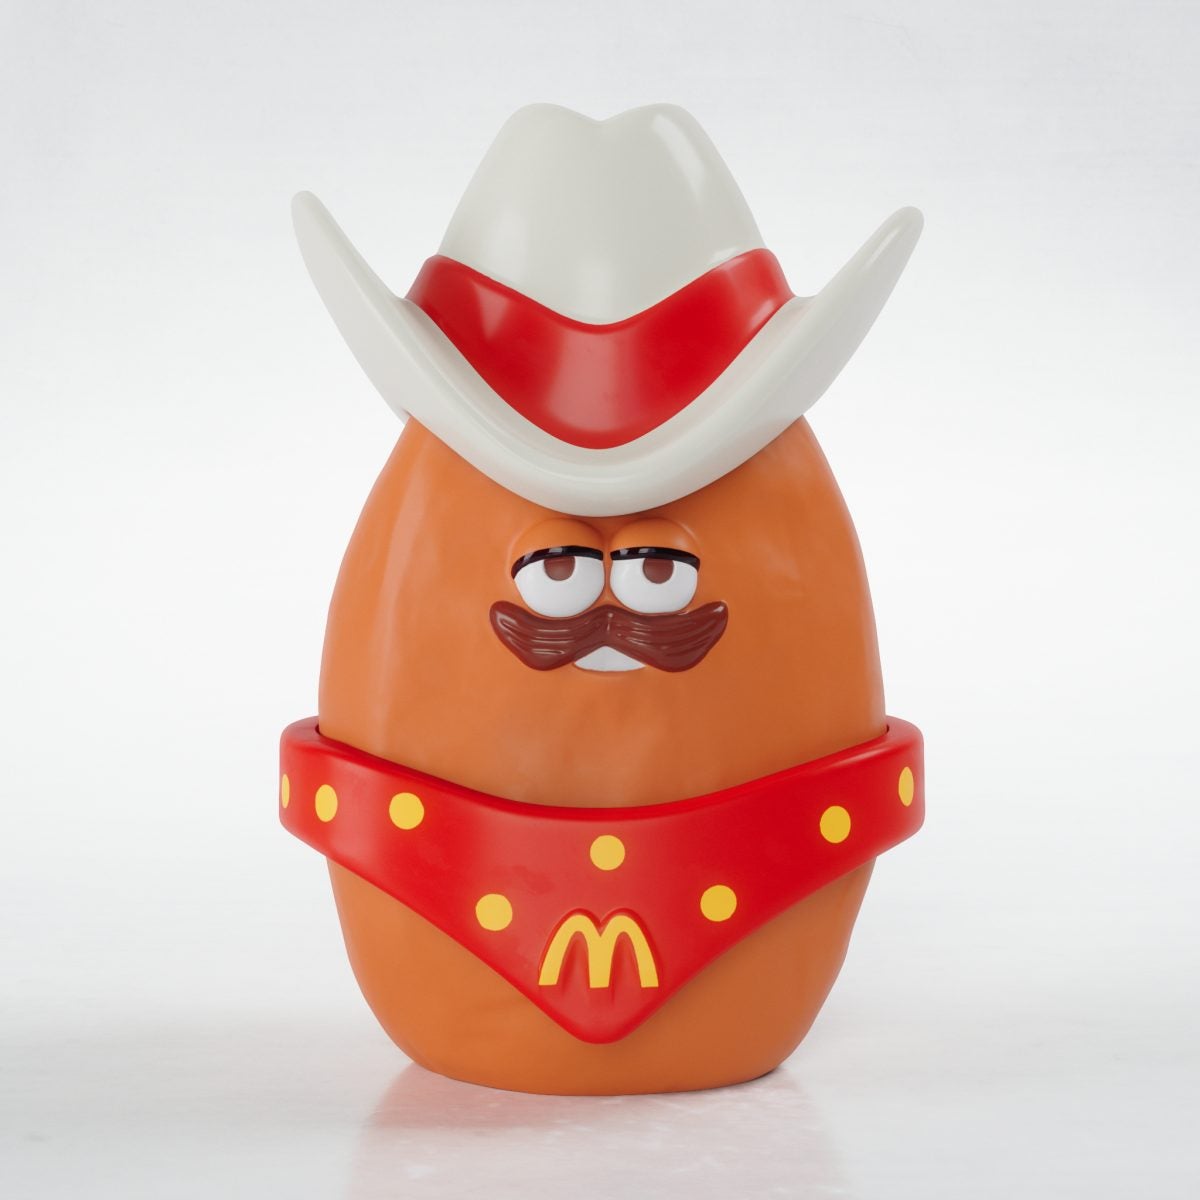 Iconic Mcdonald's Happy Meal Toys From Our Childhood Available From Nov 28 &Amp; We're Feeling Nostalgic - World Of Buzz 3